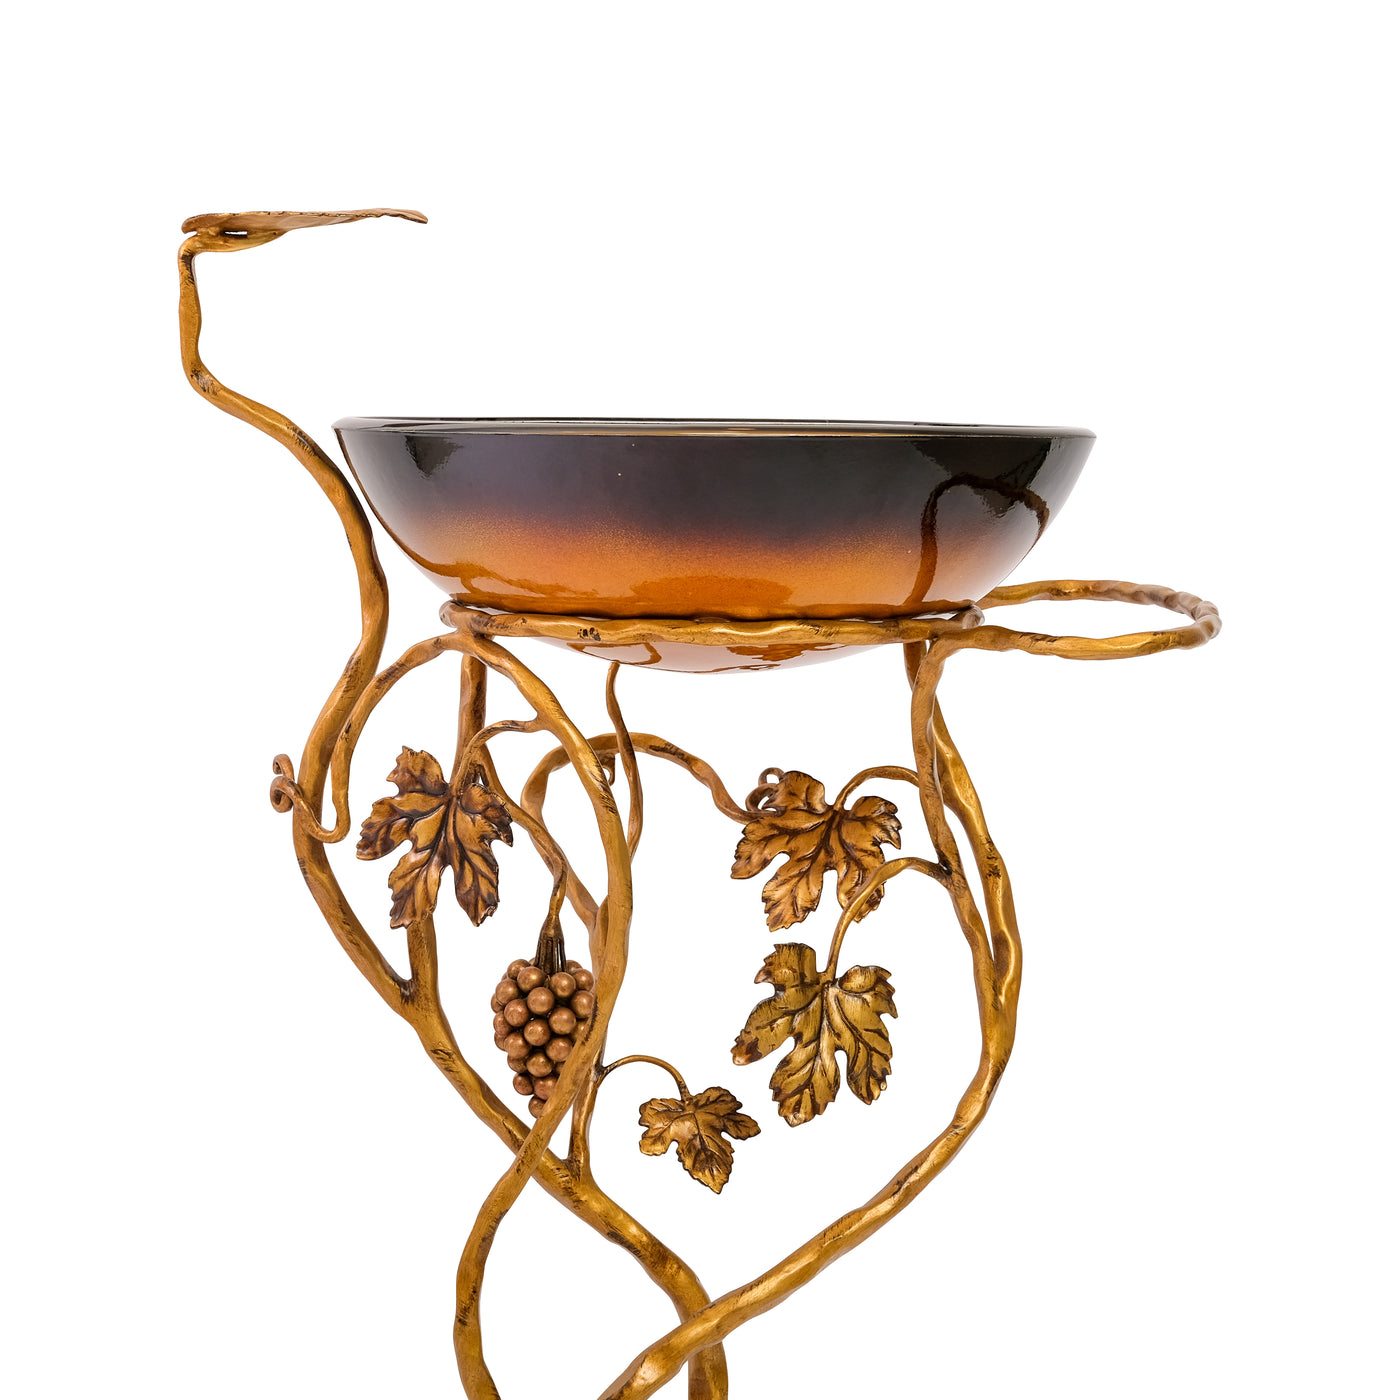 Close up of a wrought iron wash basin stand inspired by grape vines and painted in an antique golden finish